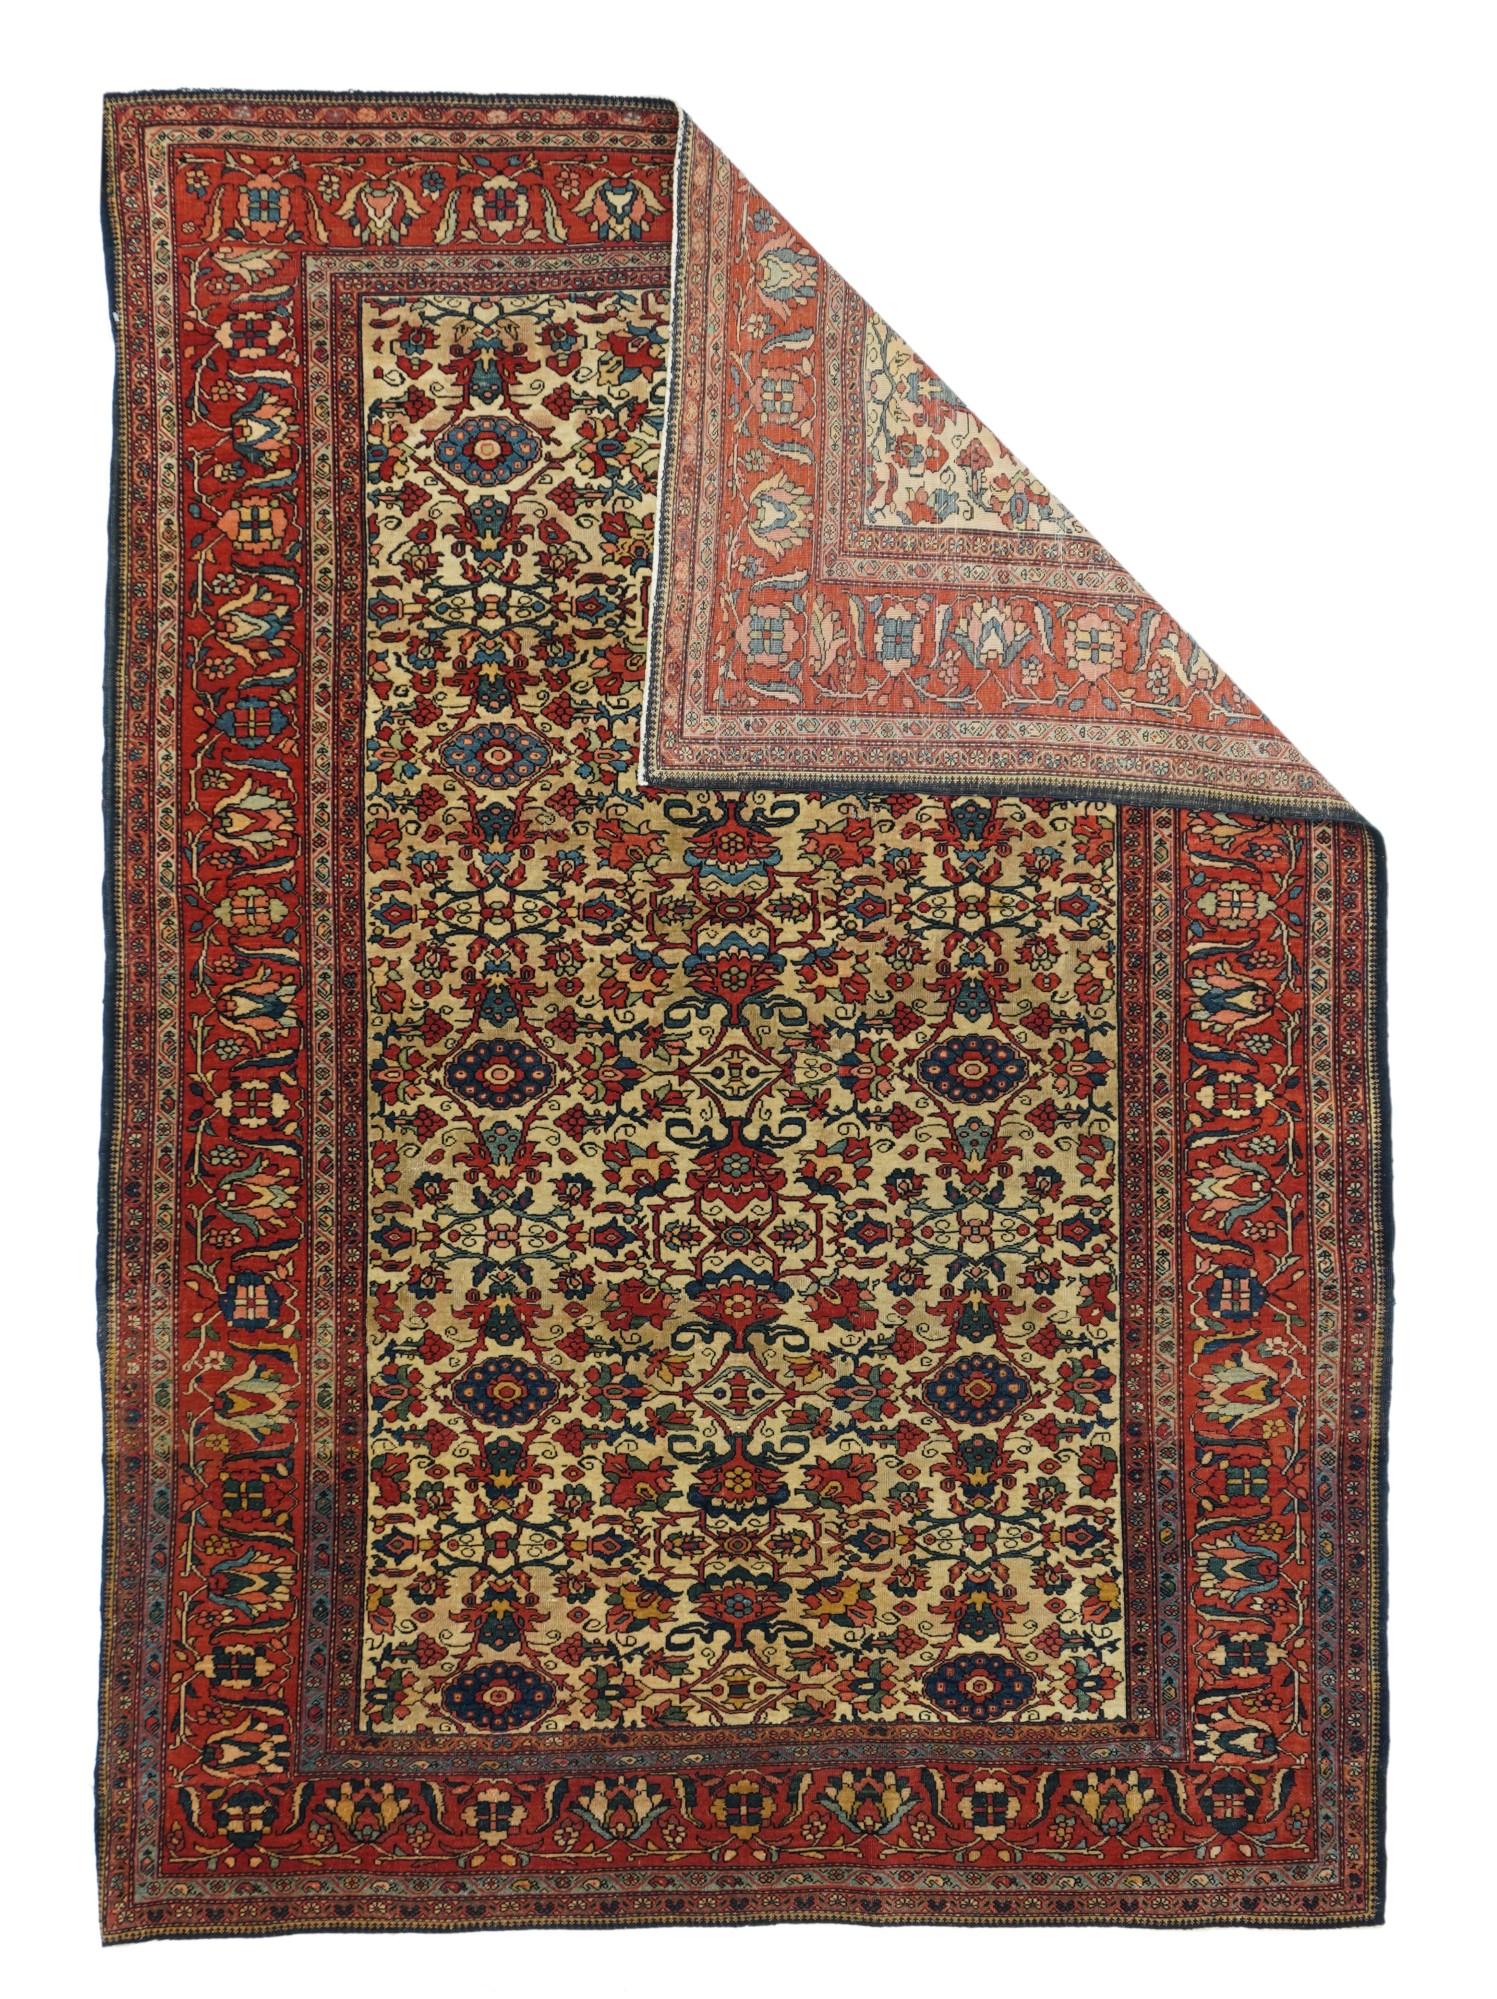 This west Persian village scatter with a robust handle on cotton foundation shows a moderately elaborate, smaller scale allover Herati design on ecru, within a red border of inward-facing palmettes alternating with crosses within elongated rosettes.